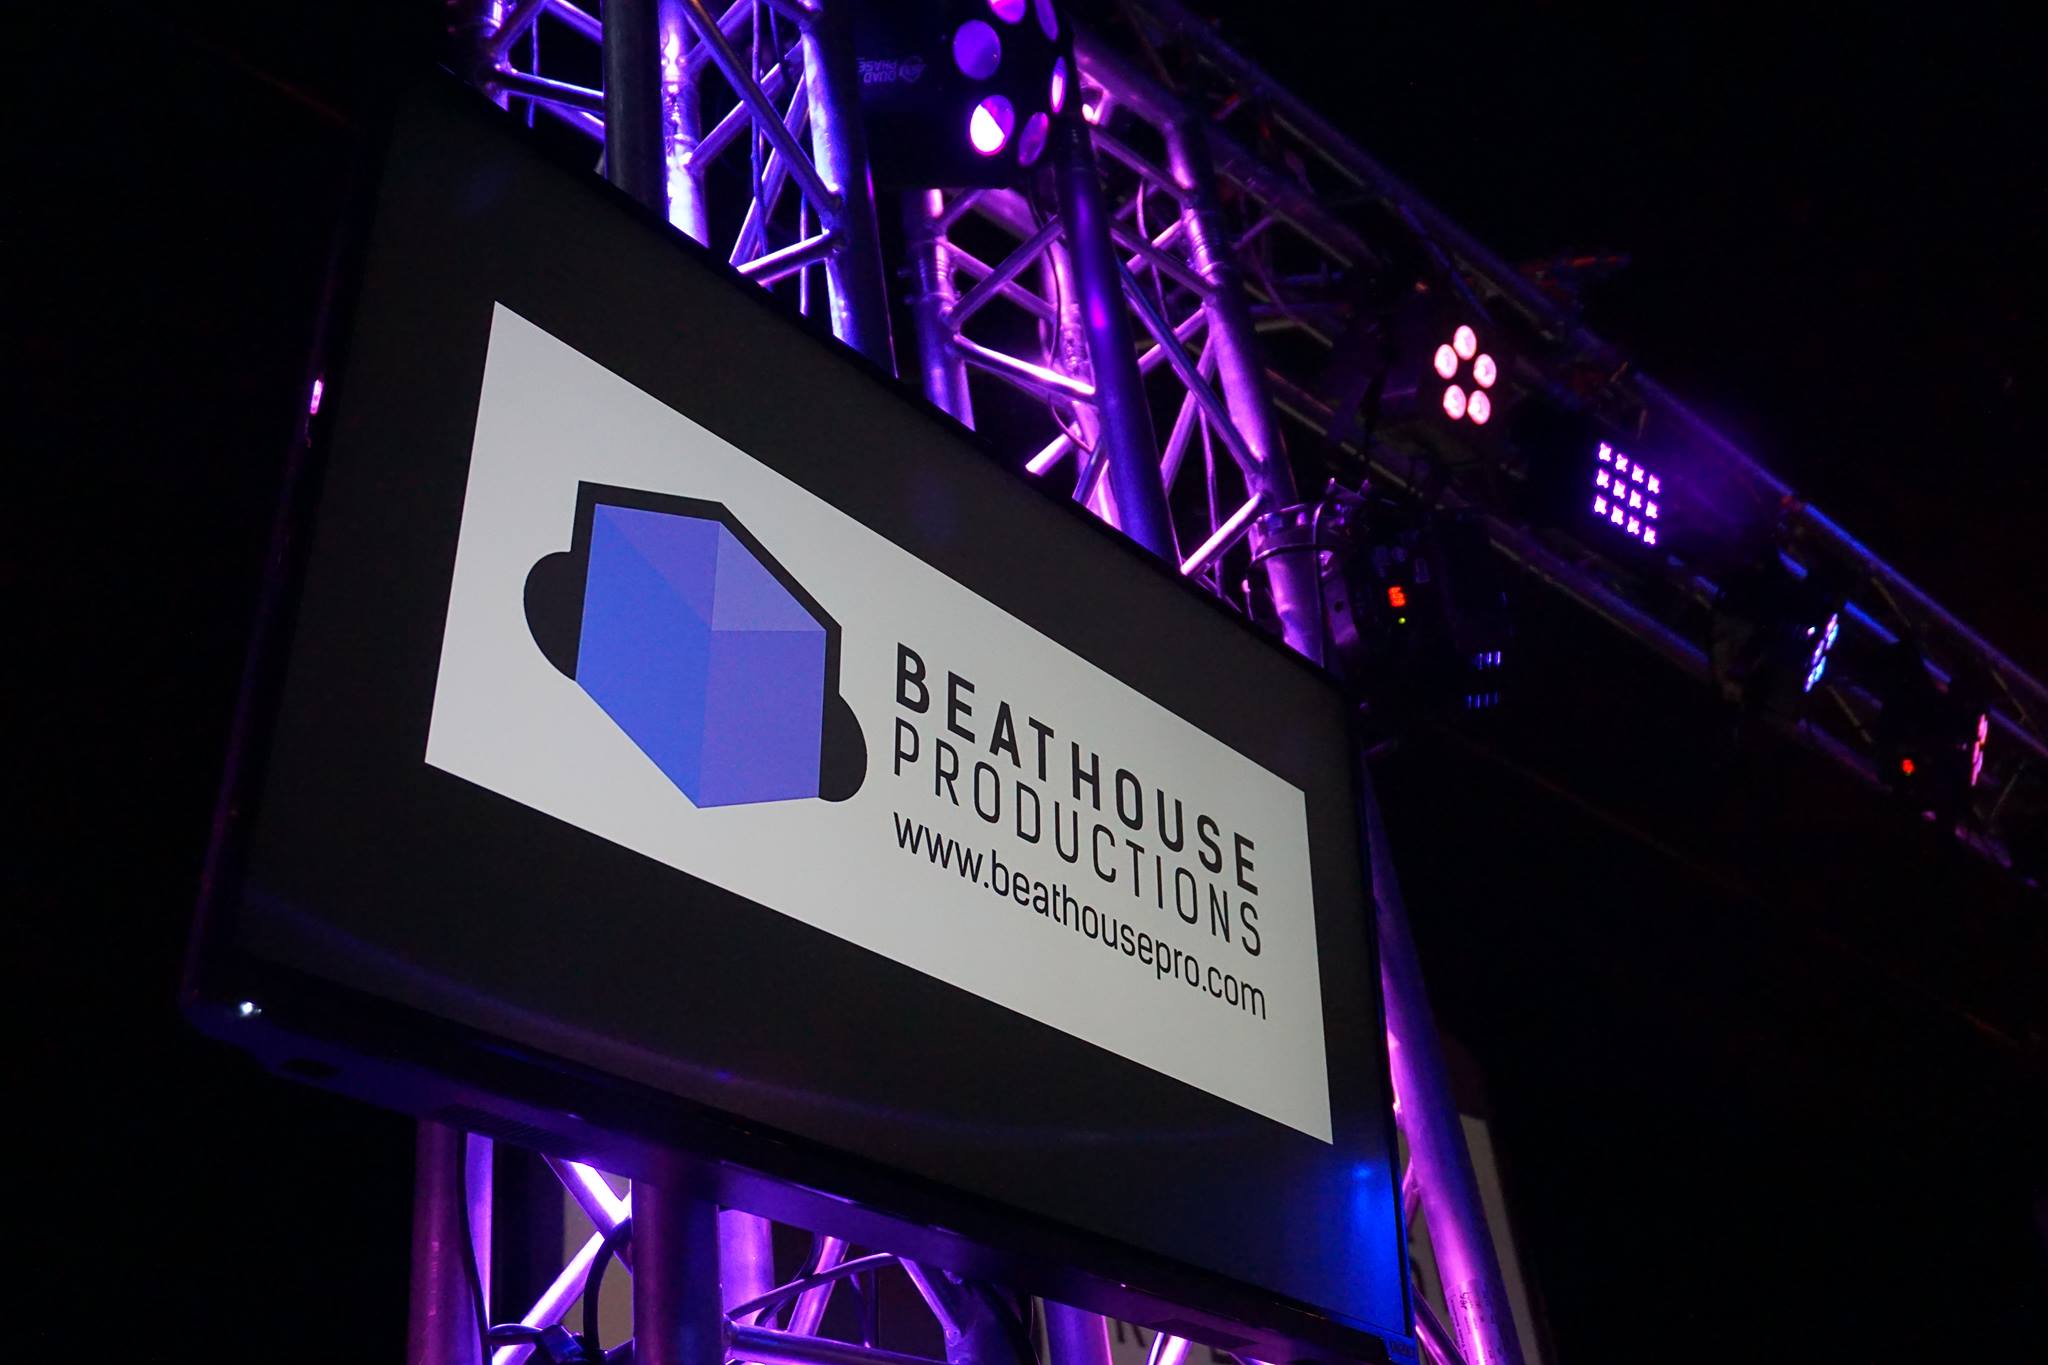 beat house productions 